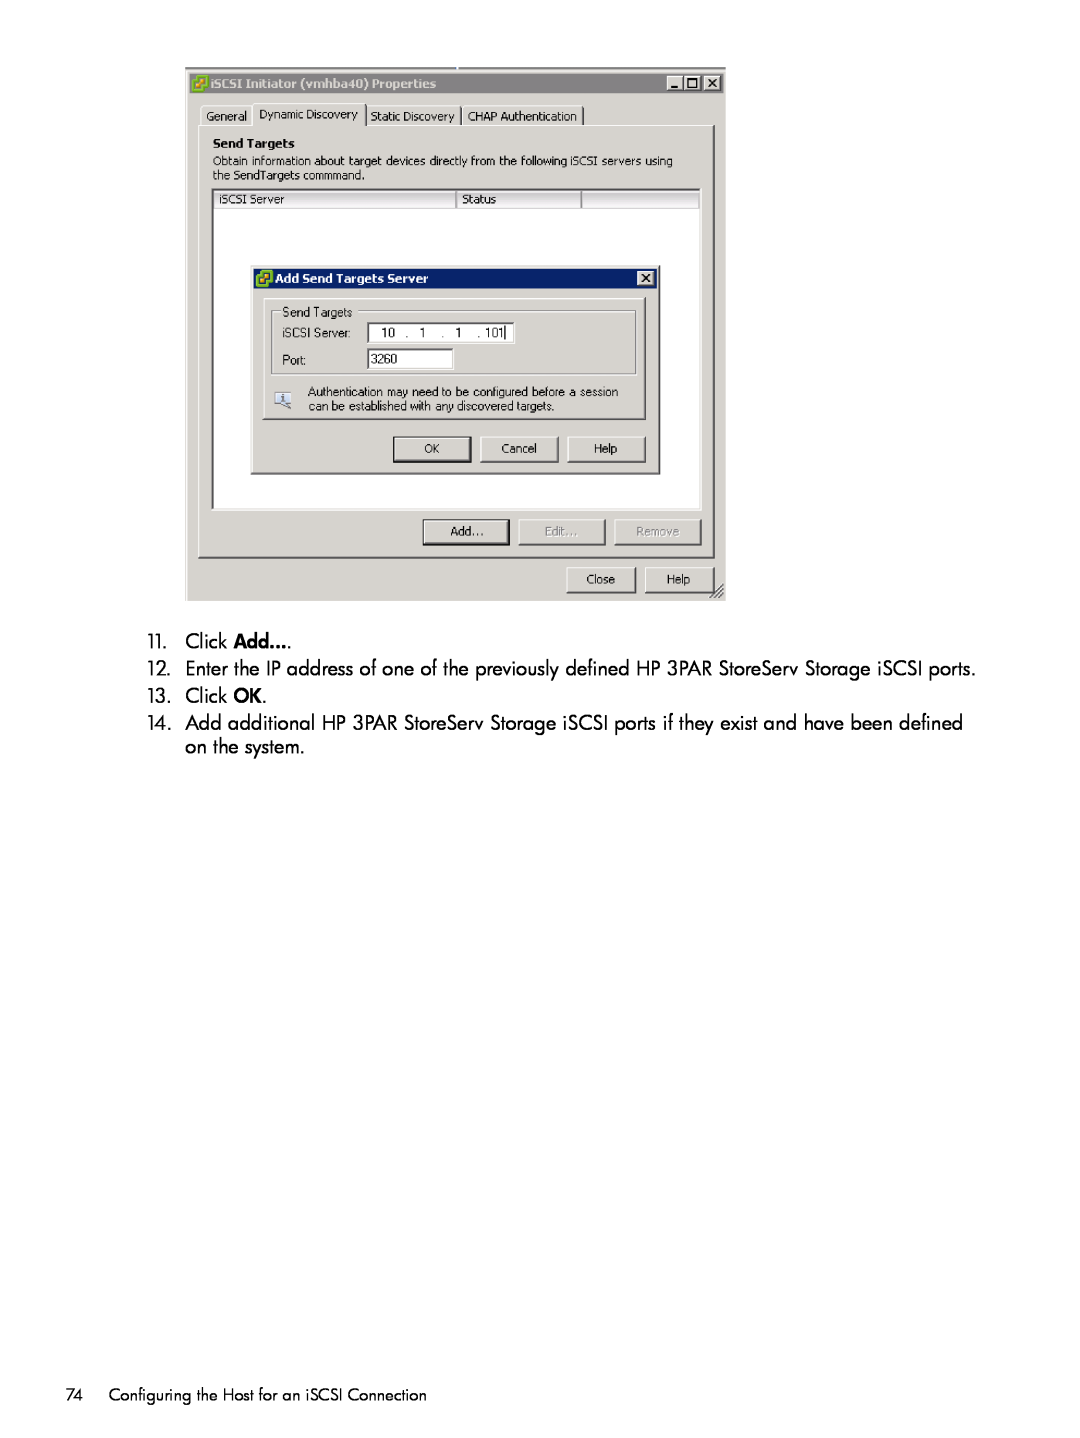 HP QR516B manual Click Add, Click OK, Configuring the Host for an iSCSI Connection 